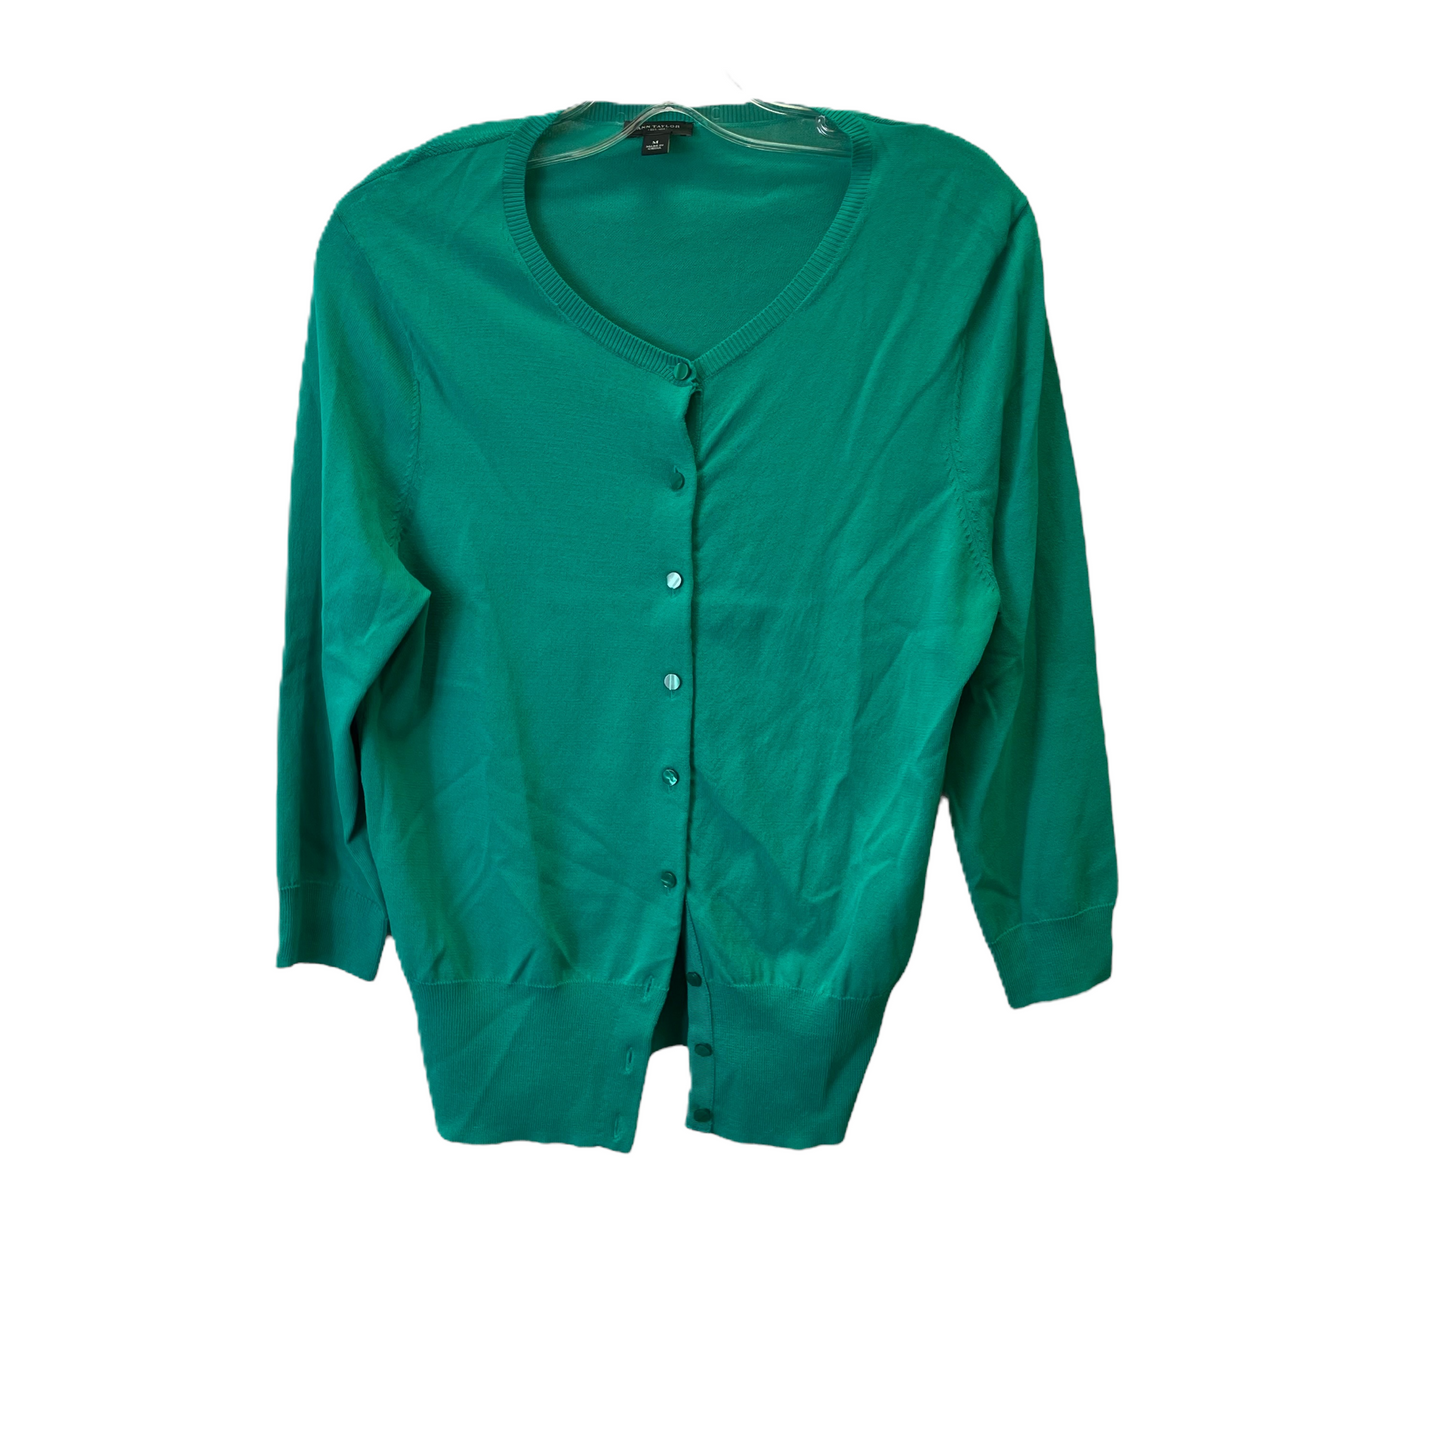 Green Sweater By Ann Taylor, Size: M